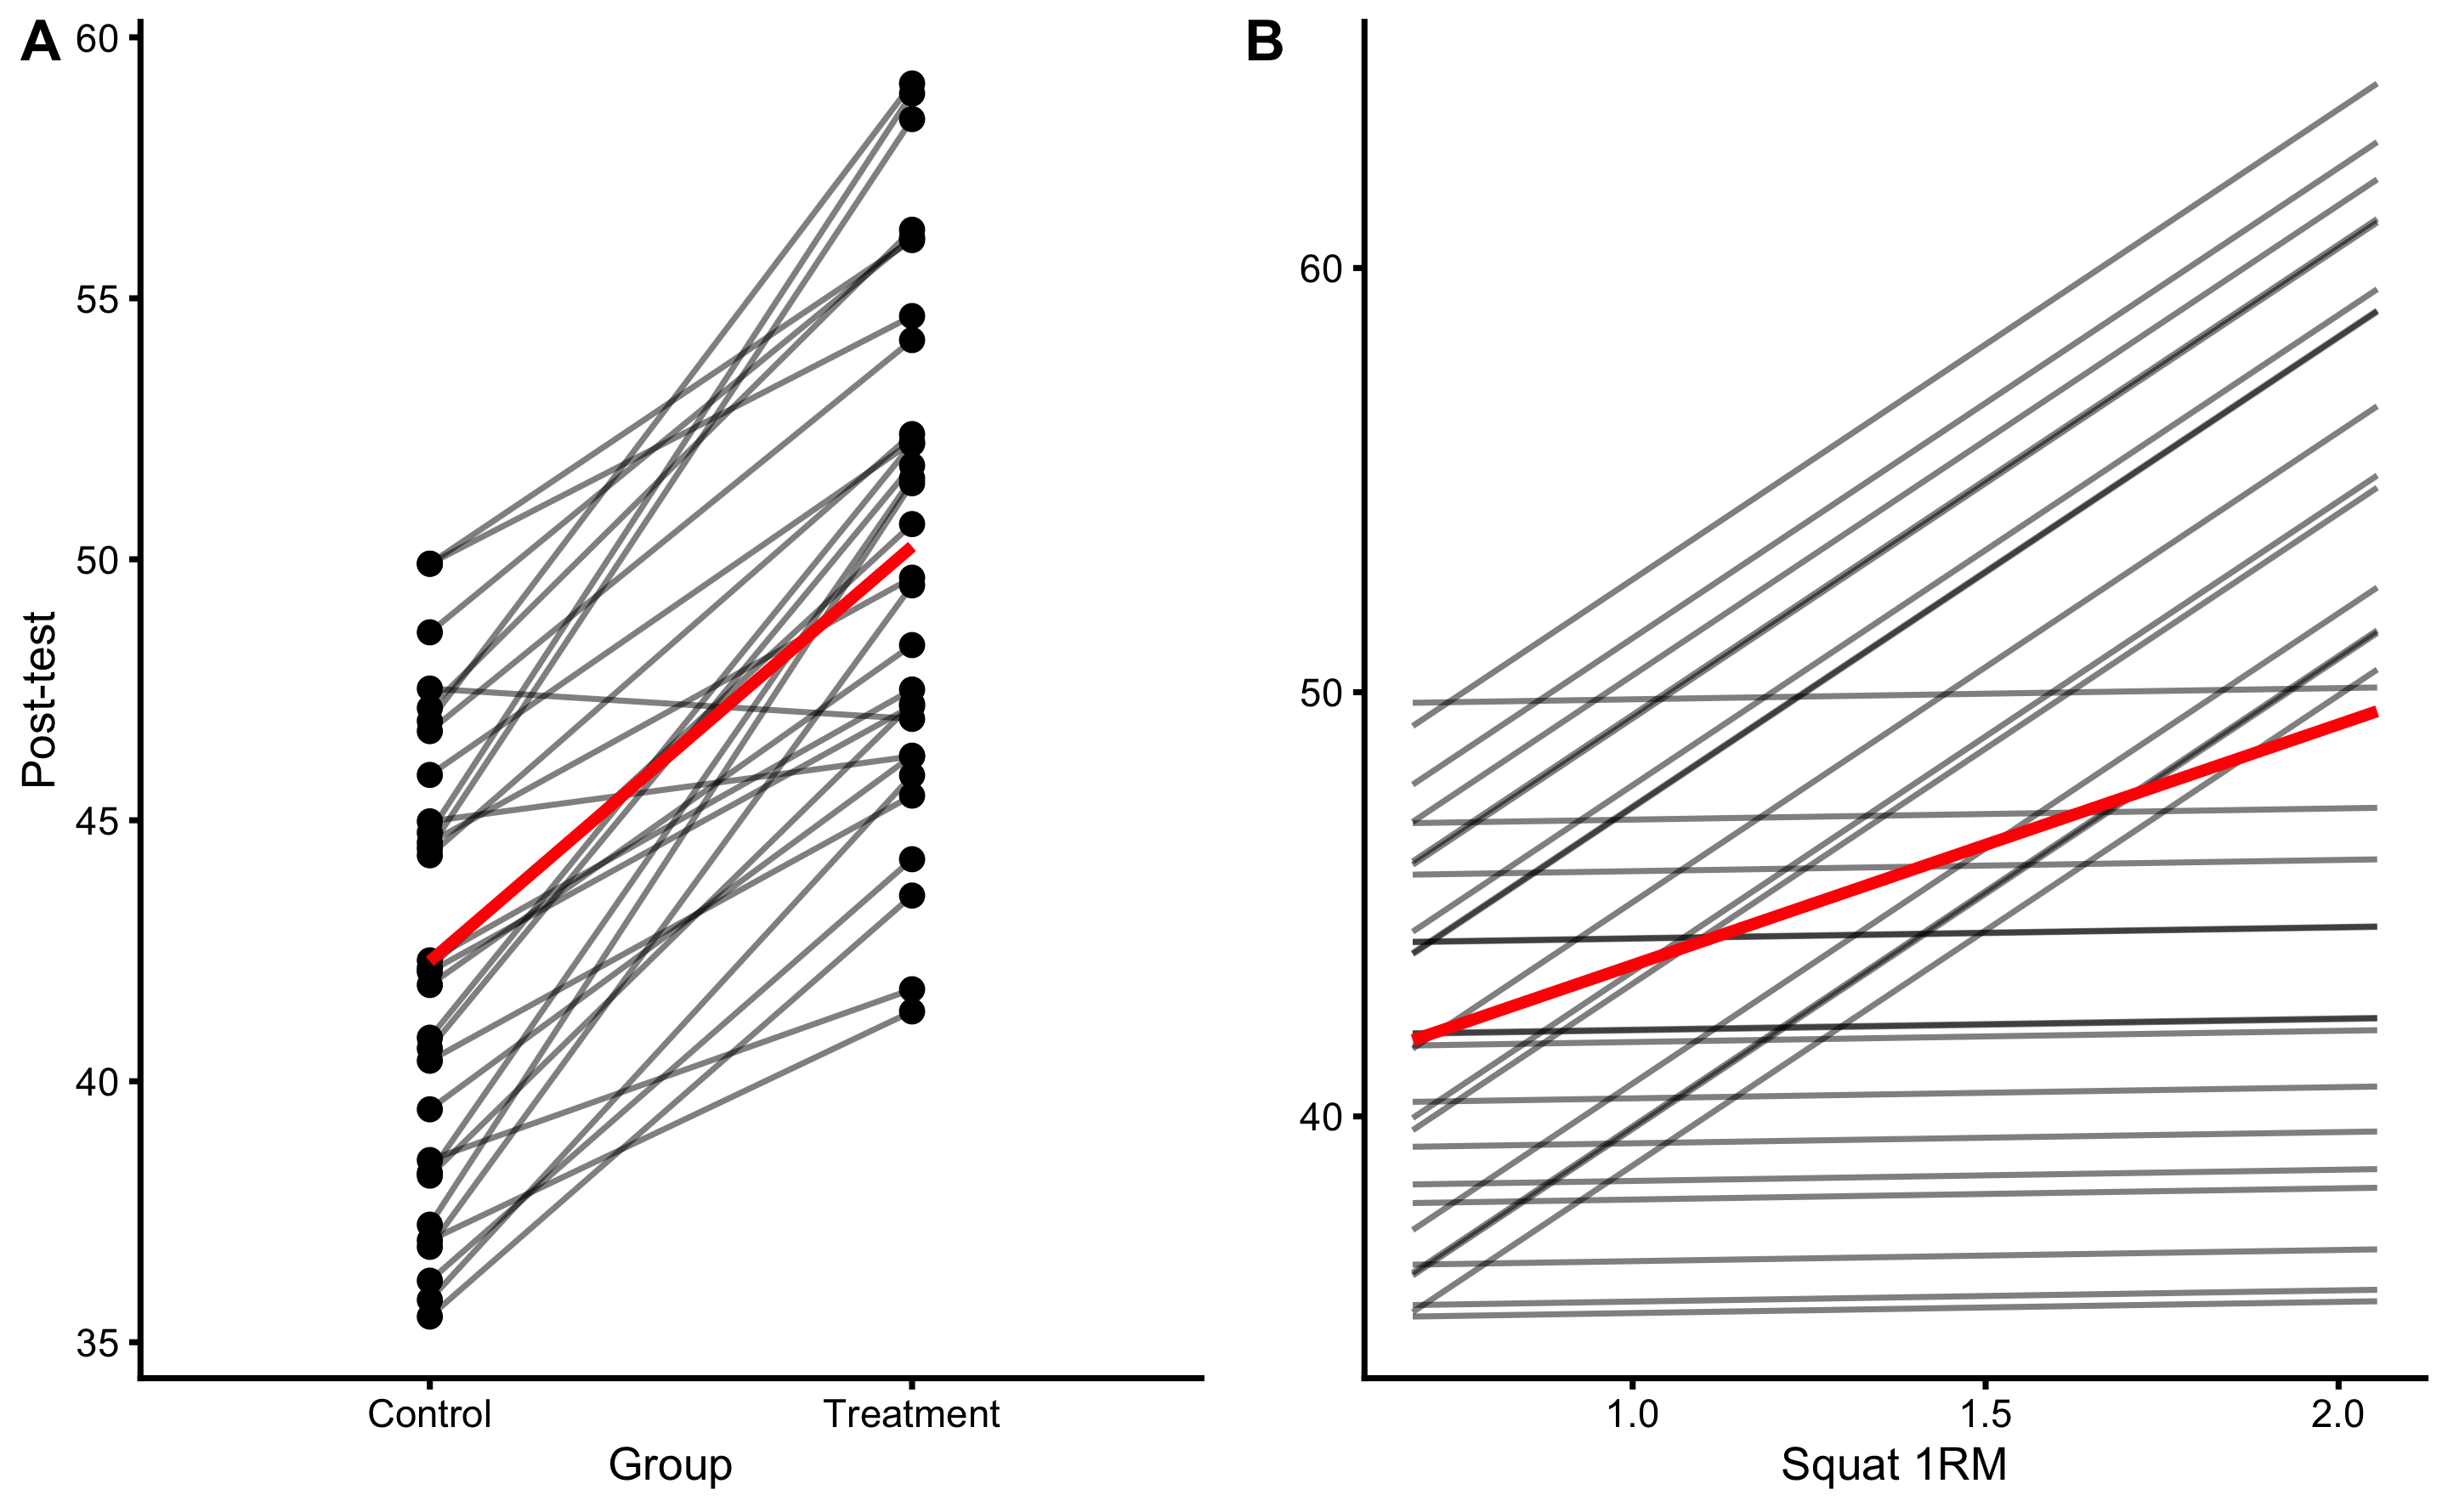 PDP and ICE plots for Group and Strength 1RM predictors using RCT model with interaction